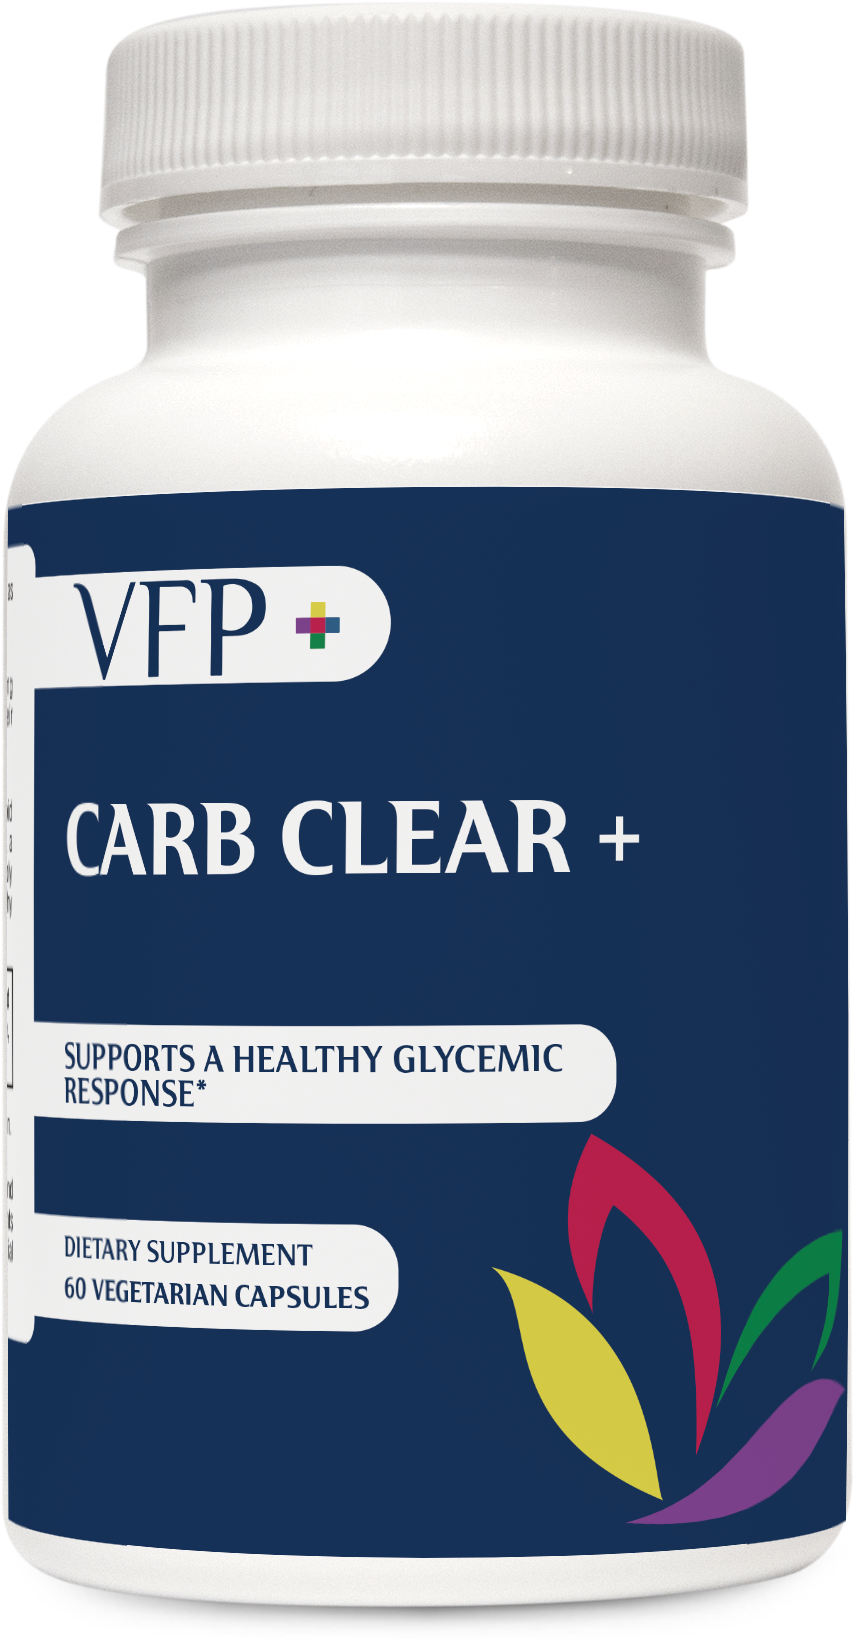 Carb Clear +.